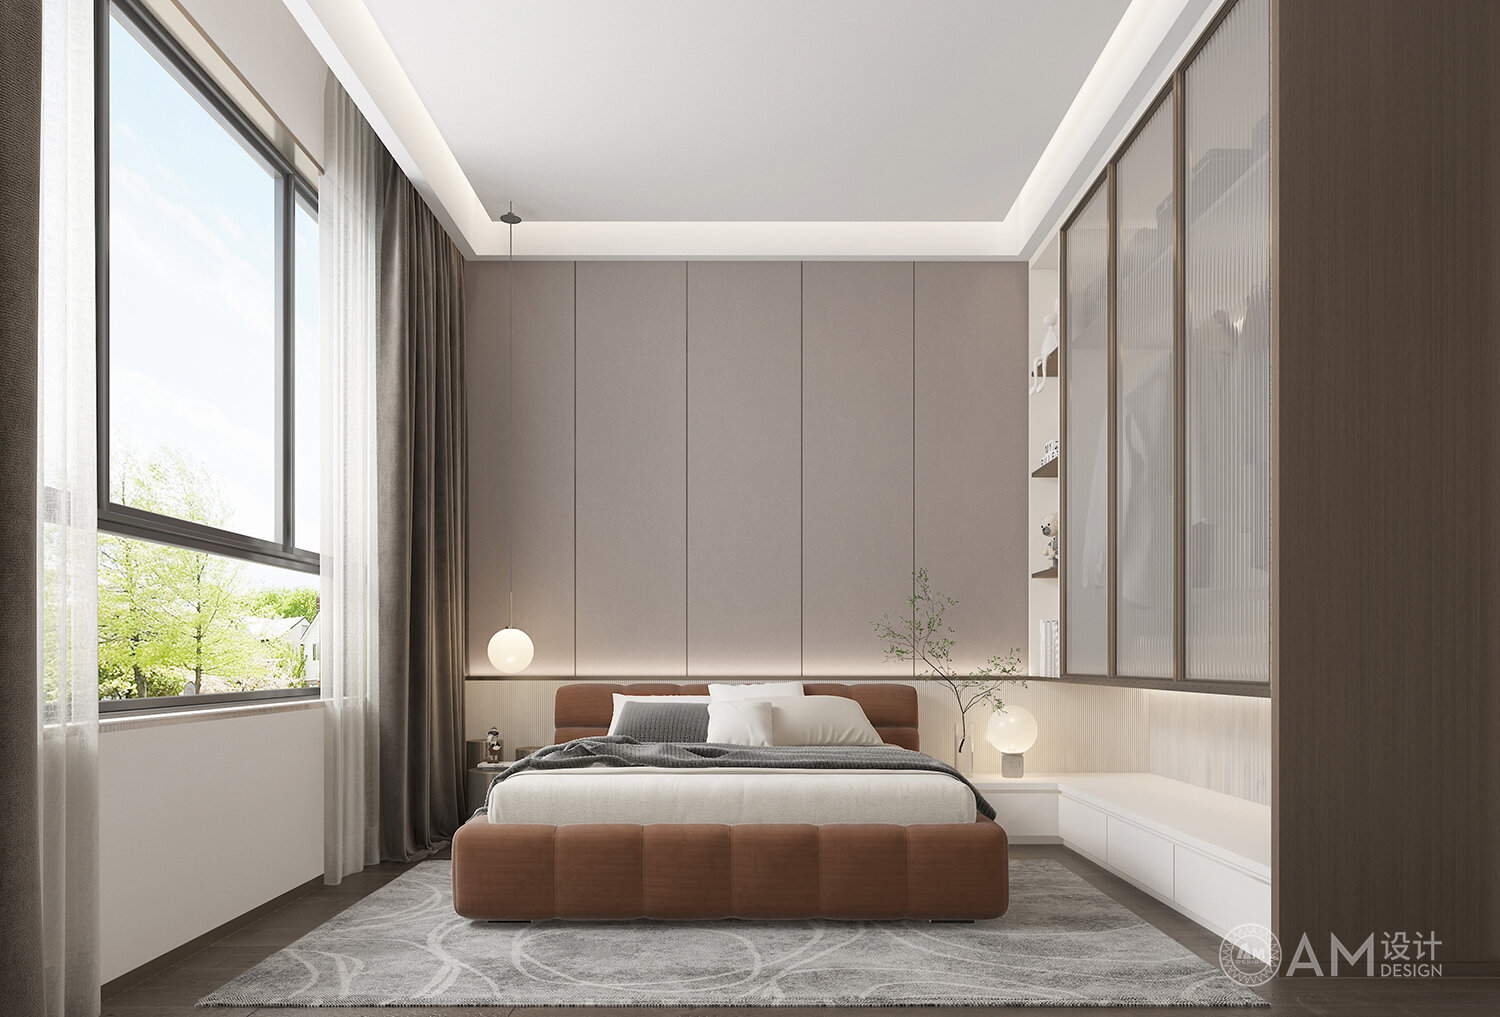 AM DESIGN | The second bedroom design of Shangluo Mansion, Shaanxi